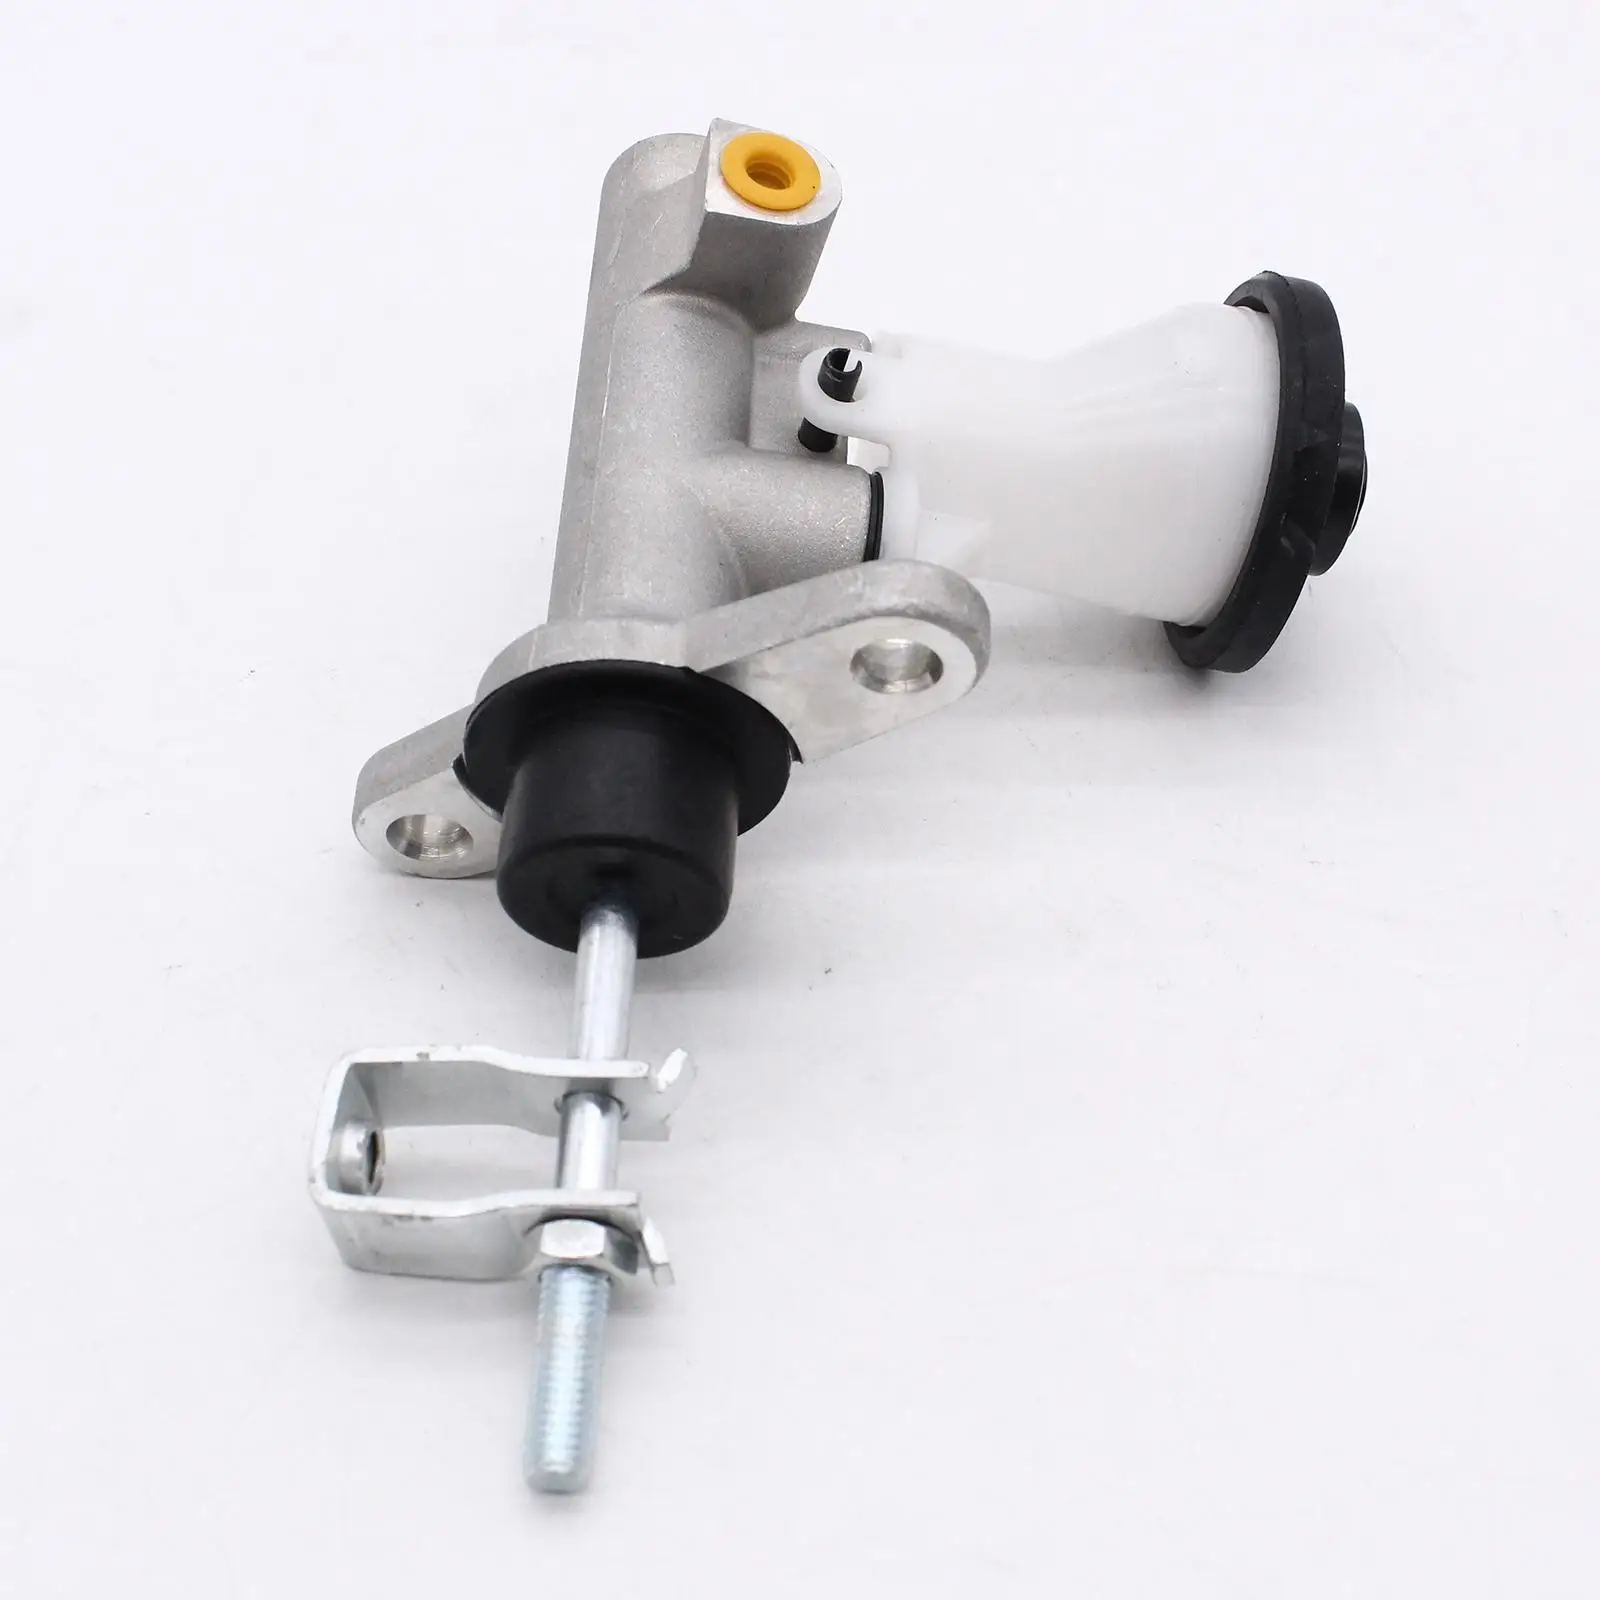 Clutch Master Slave Cylinder Accessories Replacement Parts Durable for Toyota Hilux LN106 LN107 LN111 for 4runner LN130 2.8D 3L